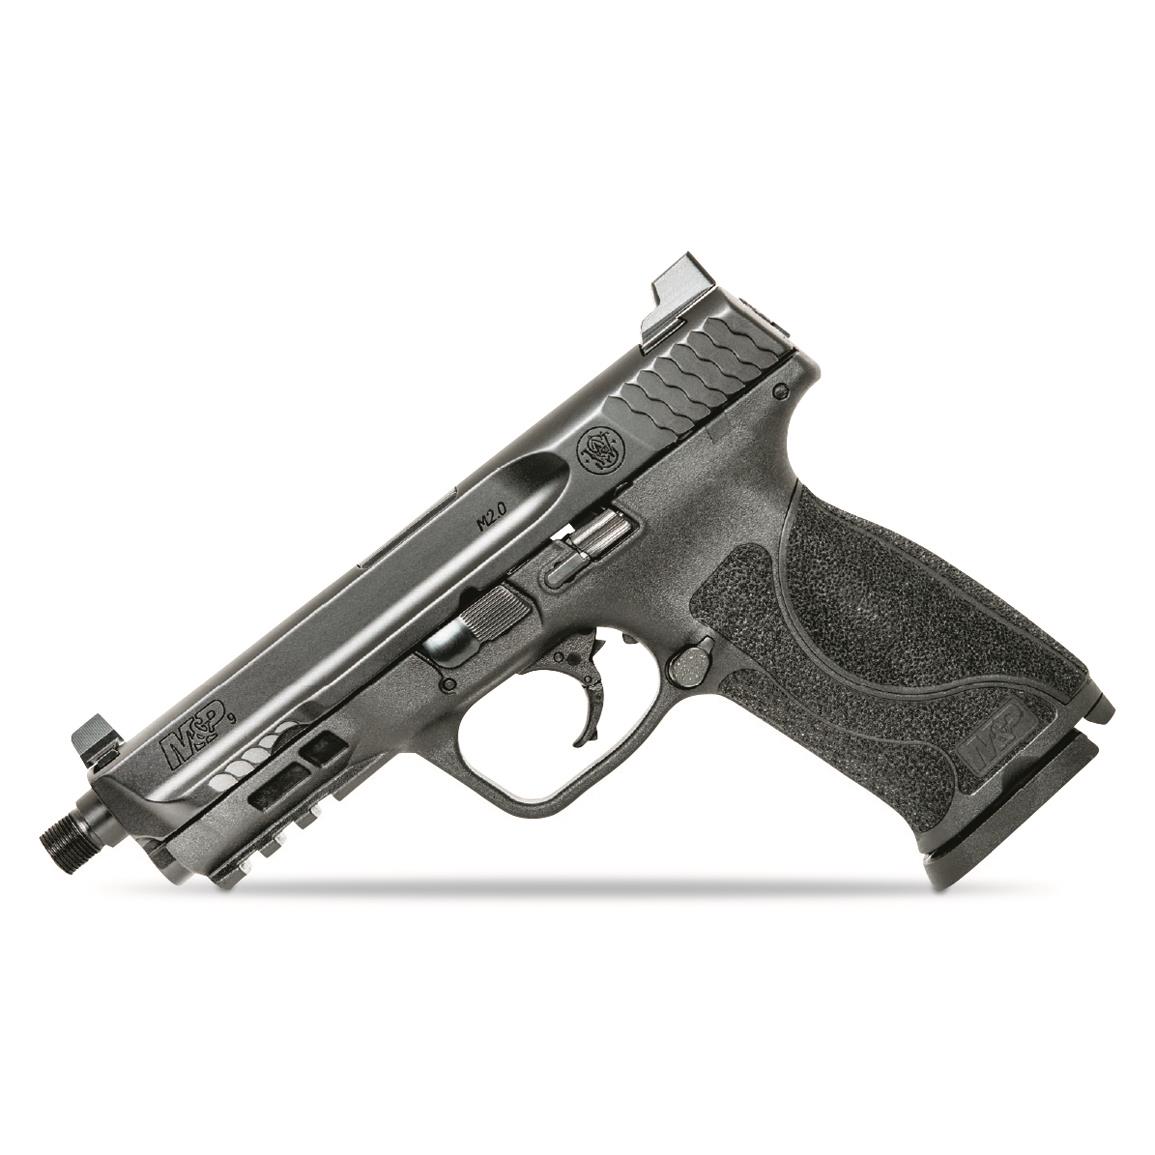 Smith &amp; Wesson M&amp;P9 M2.0 Threaded, Semi-Automatic, 9mm, 4.625&quot; Threaded Barrel, No Safety, 17+1 Rds